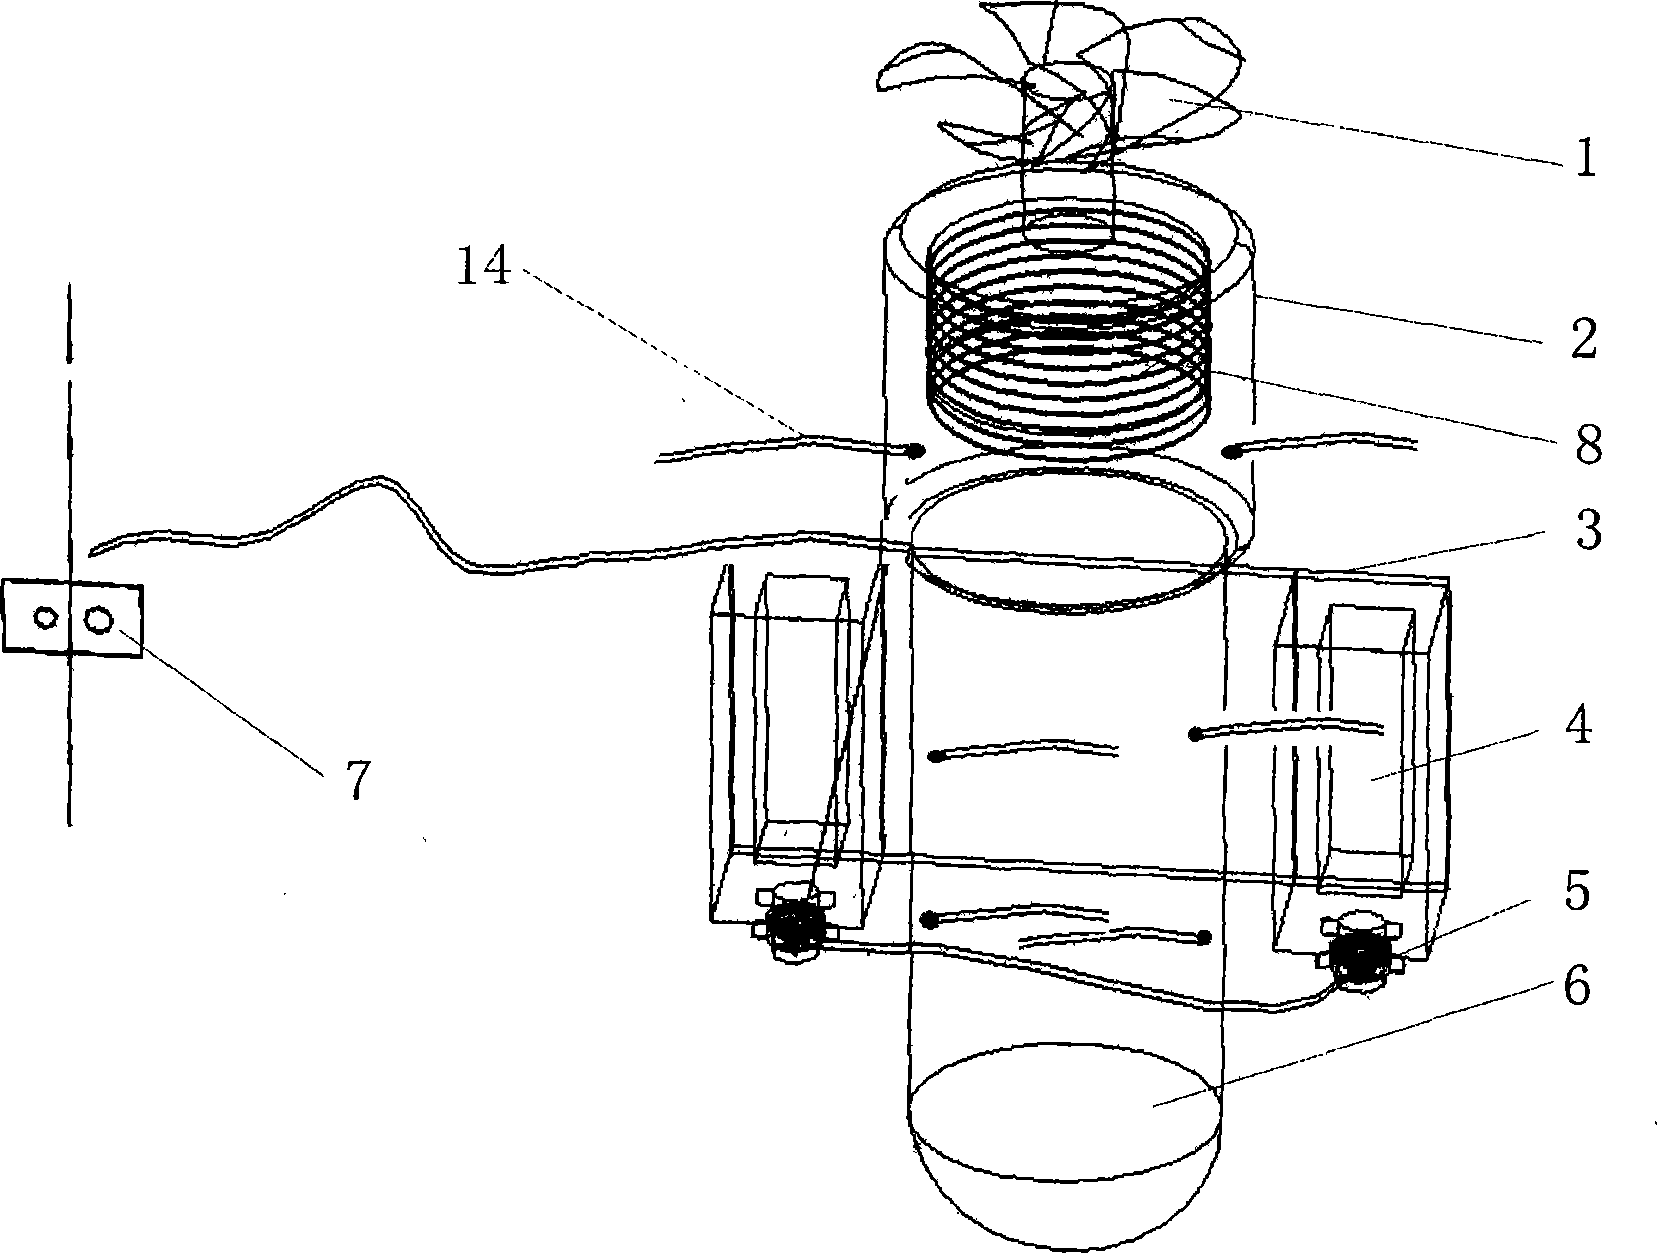 Human-back-type electric diving propulsion equipment